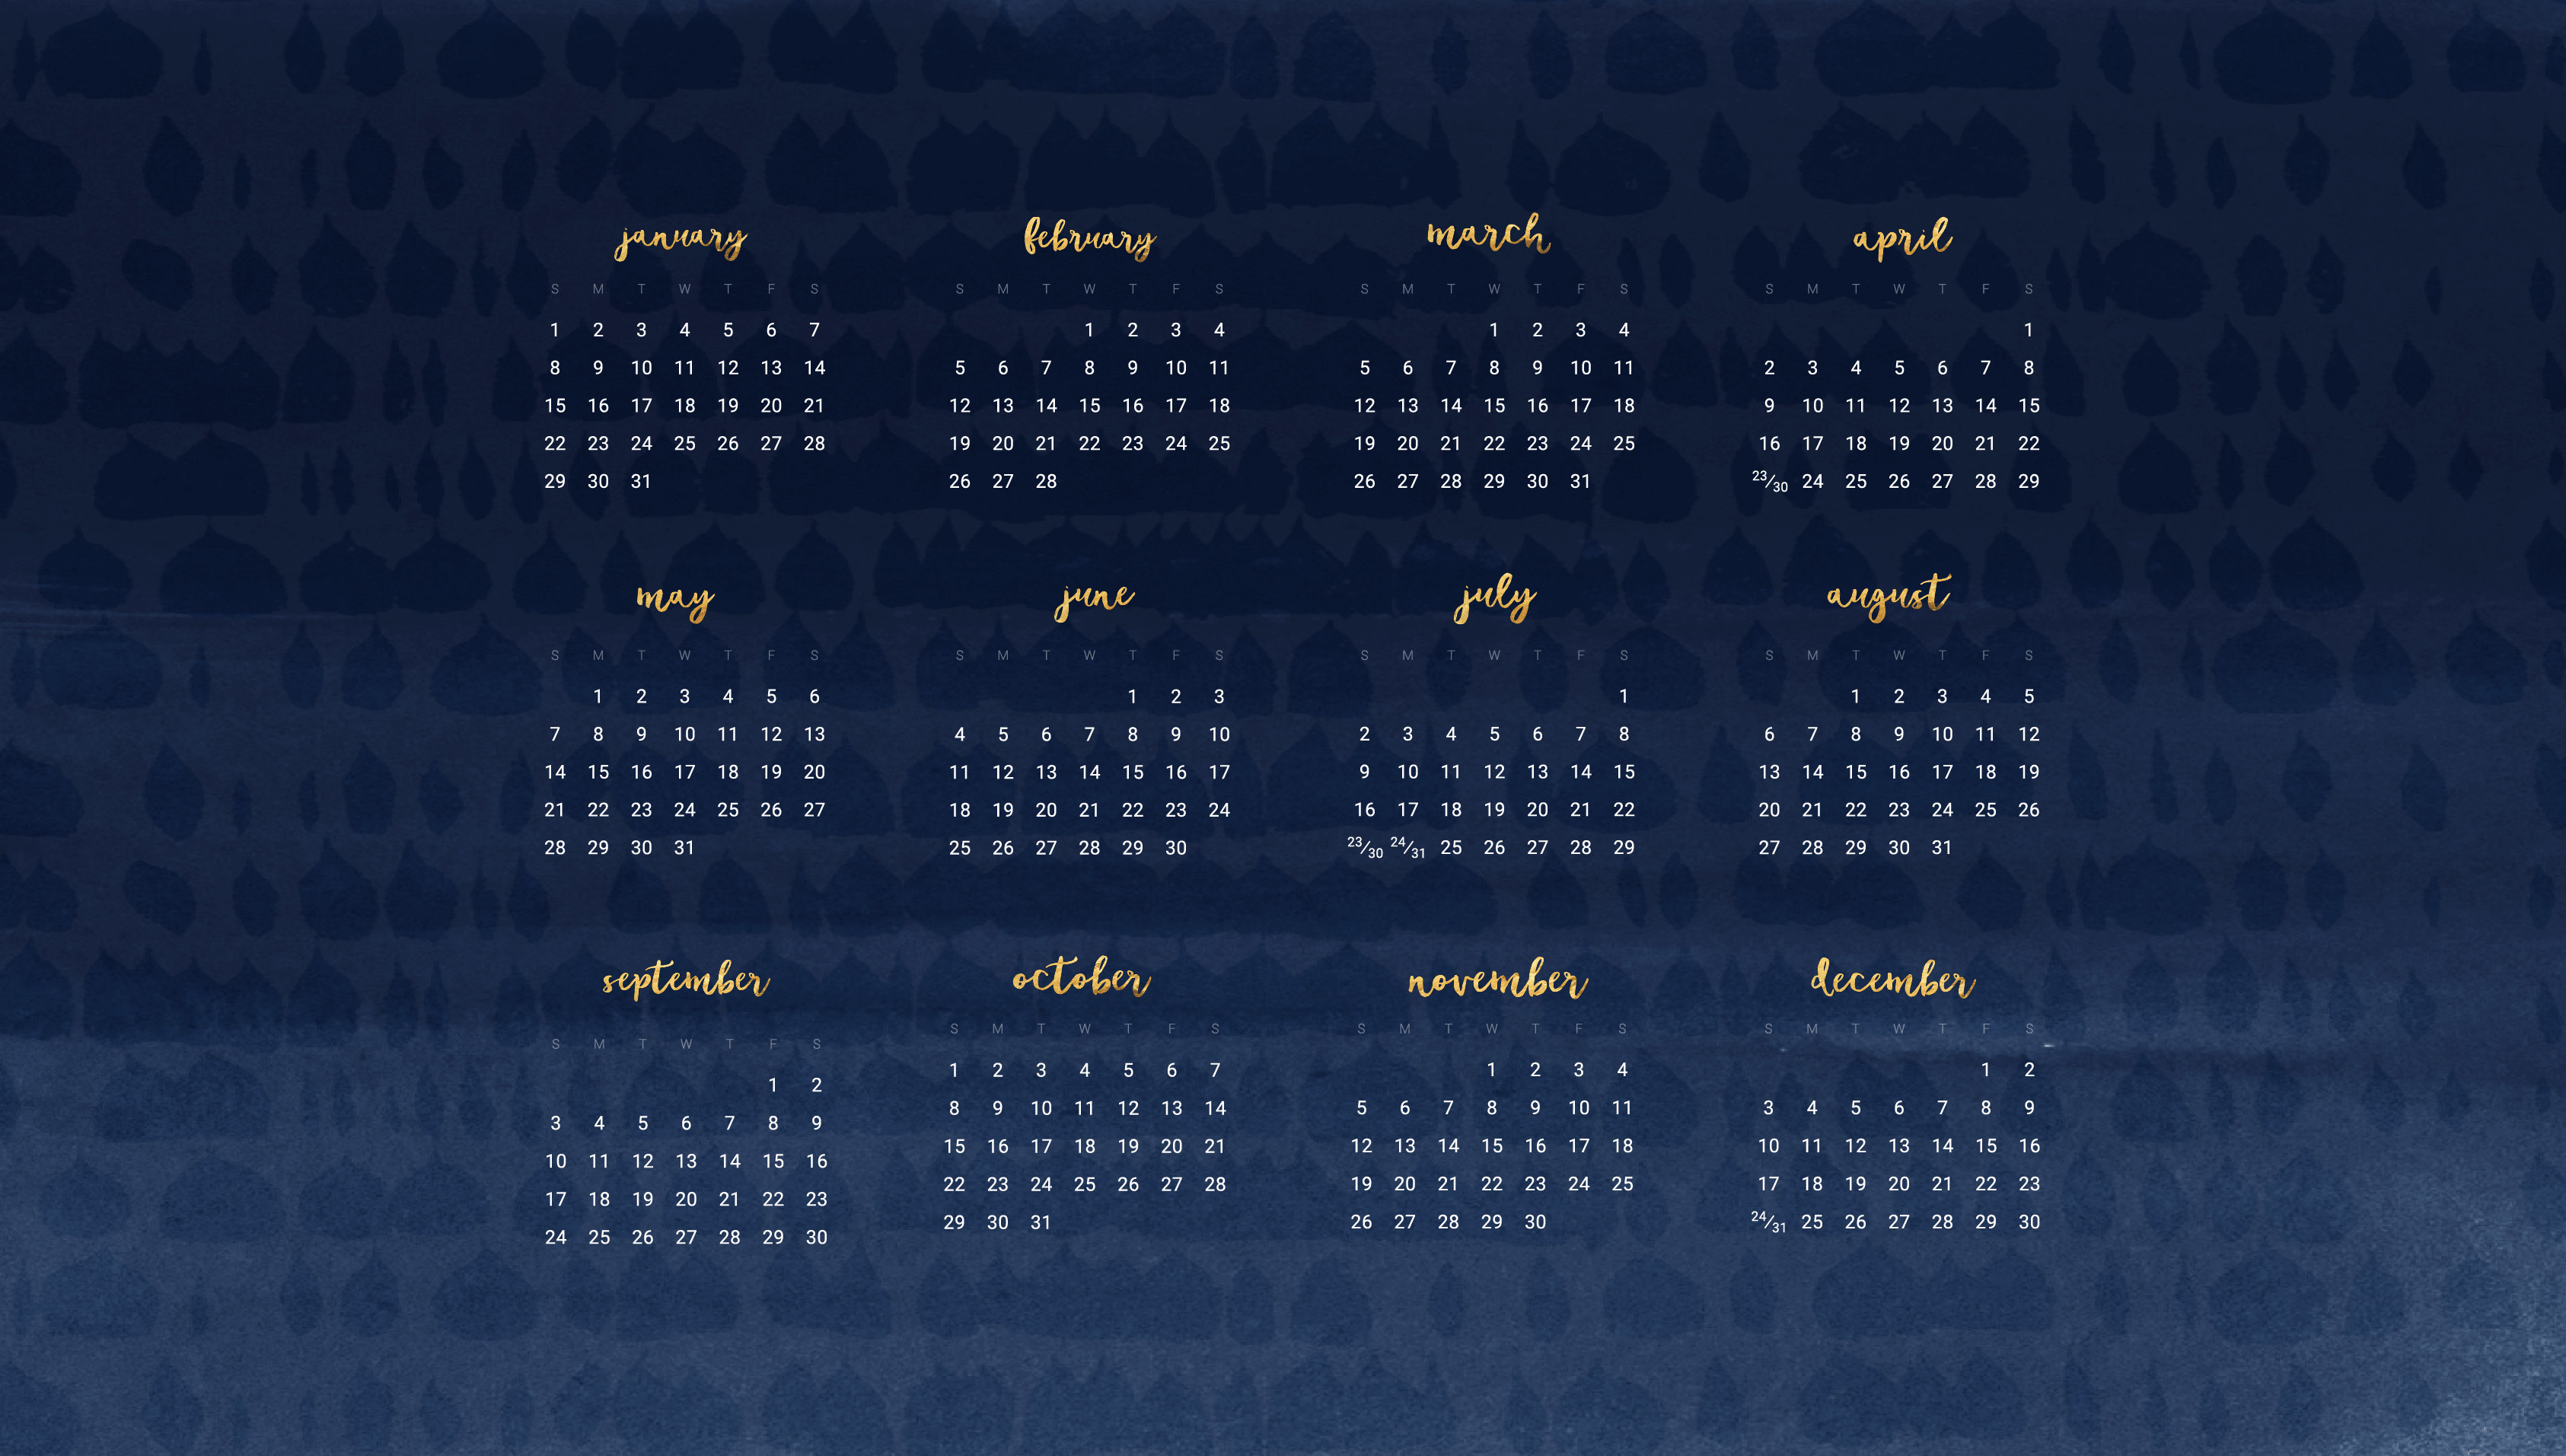 3371x1913 Wallpaper Calendars for 2018 61 images 